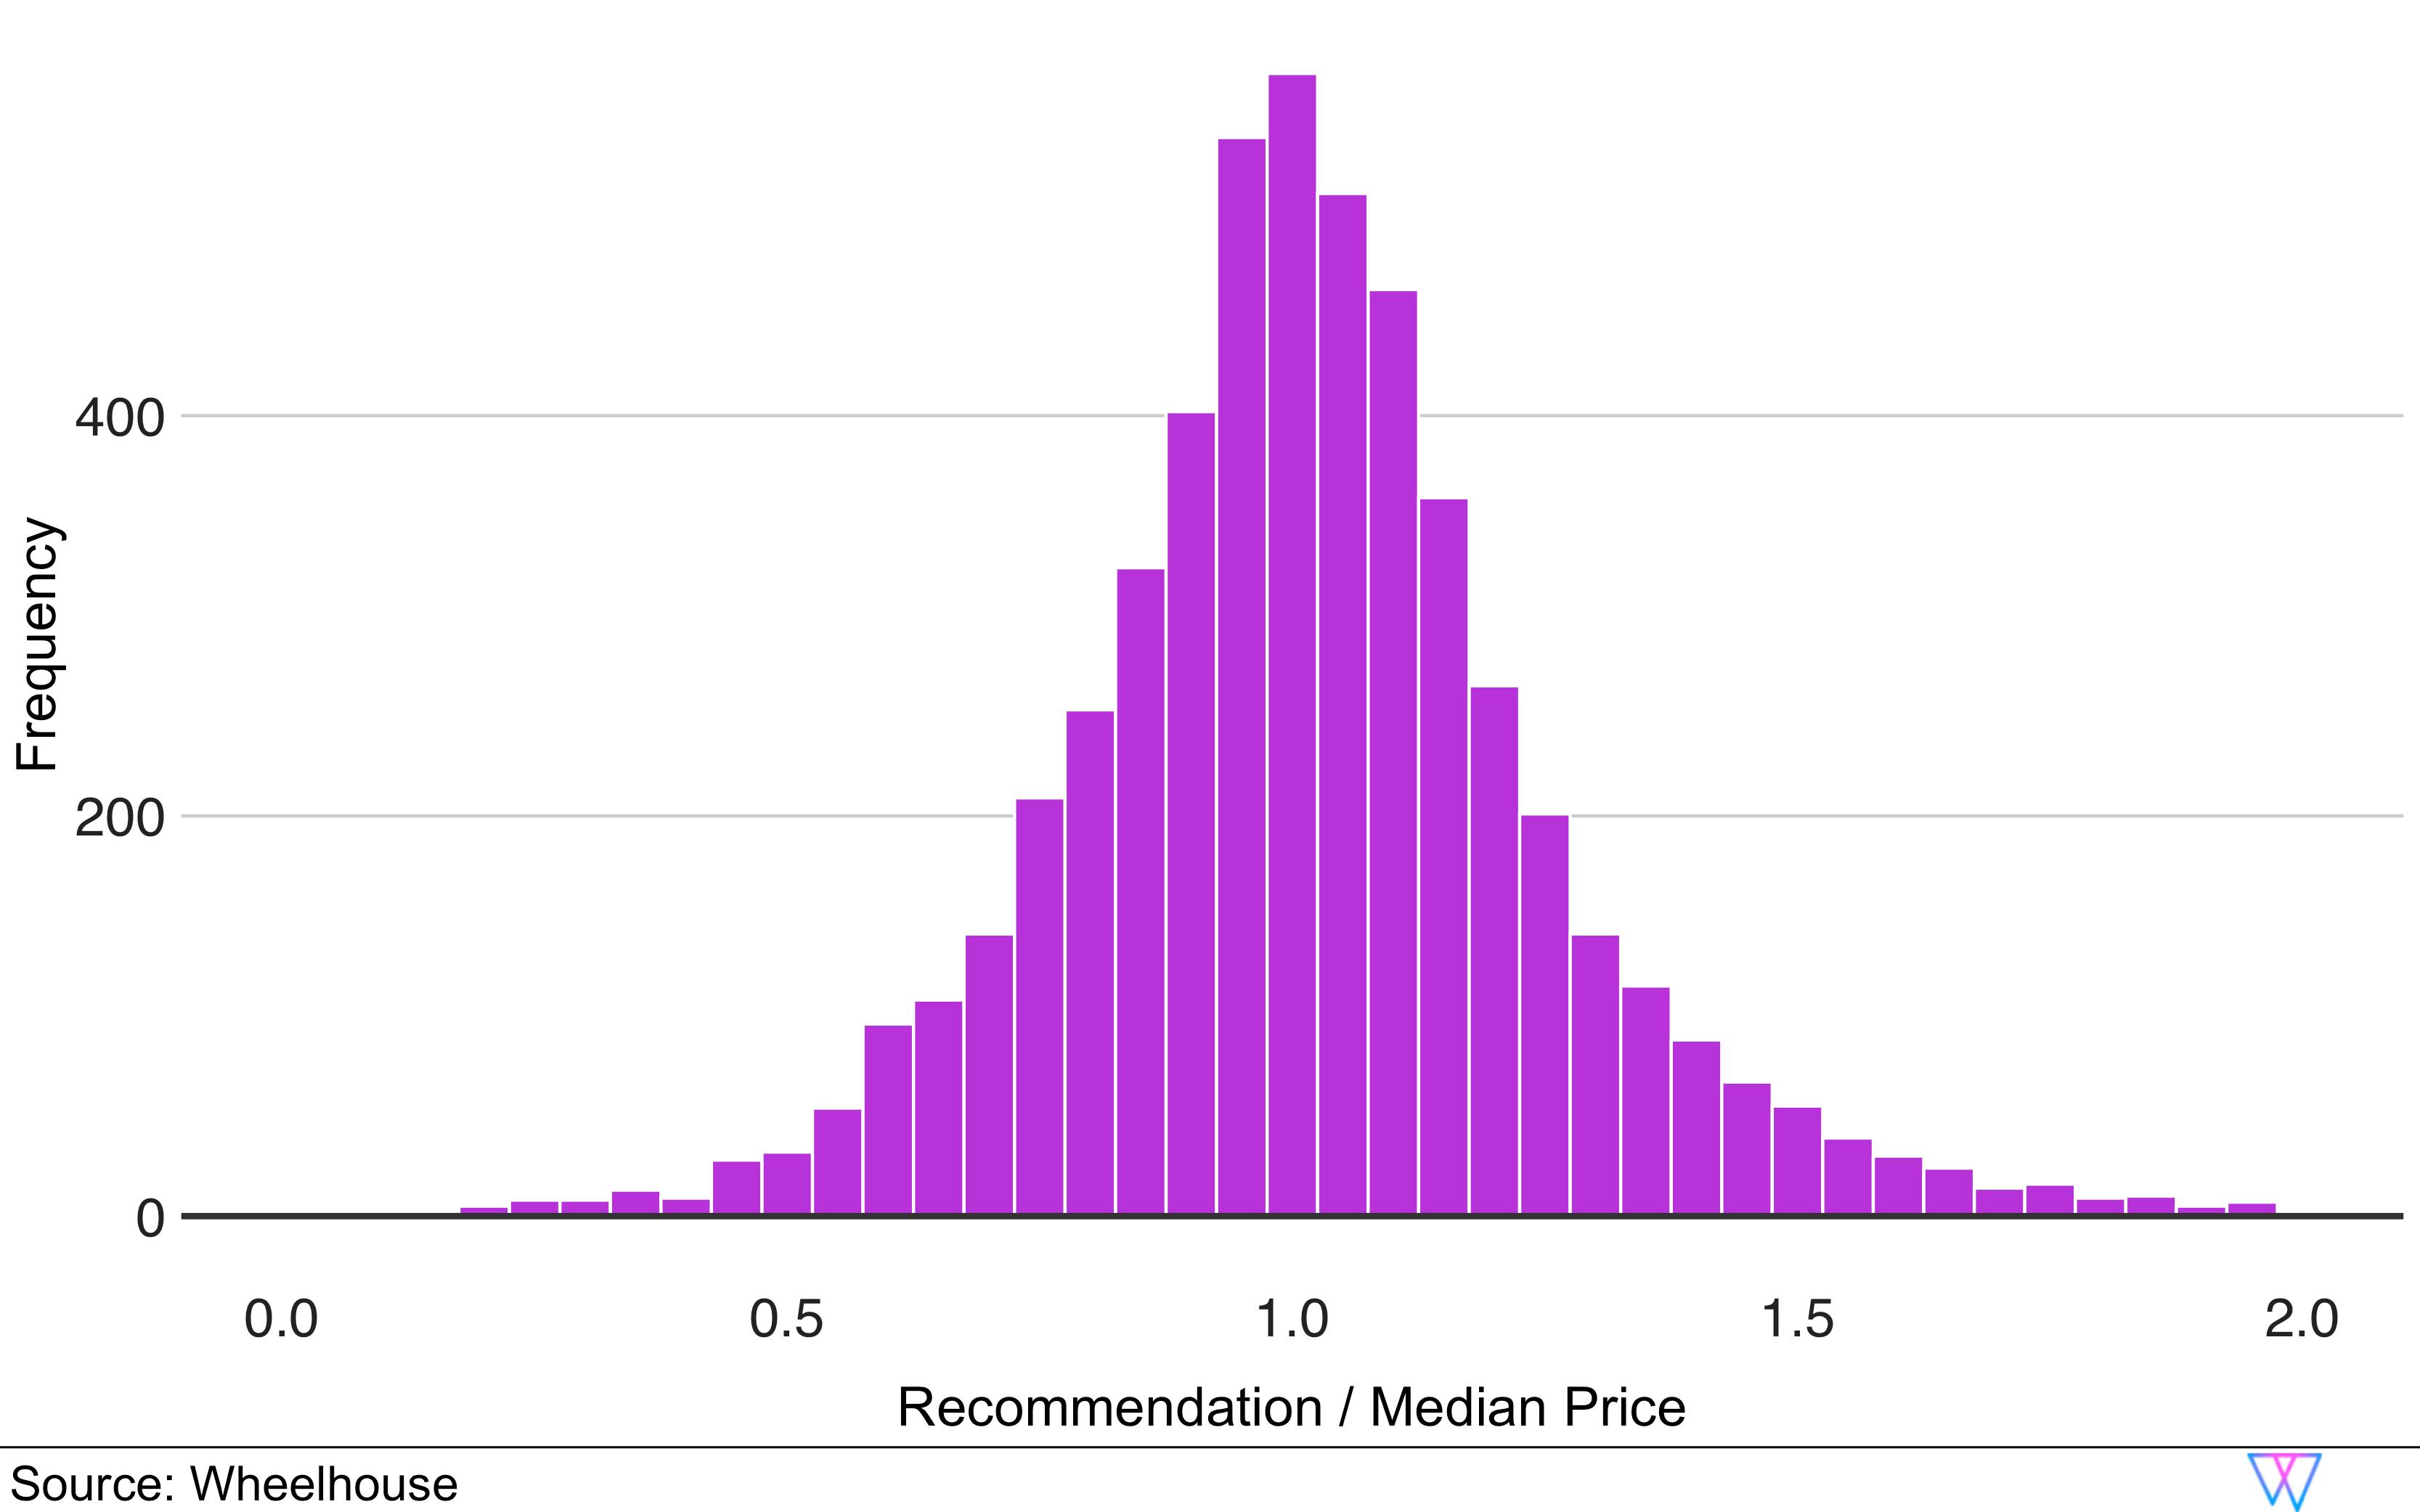 Base price model histogram depicting recommended price to median price frequency